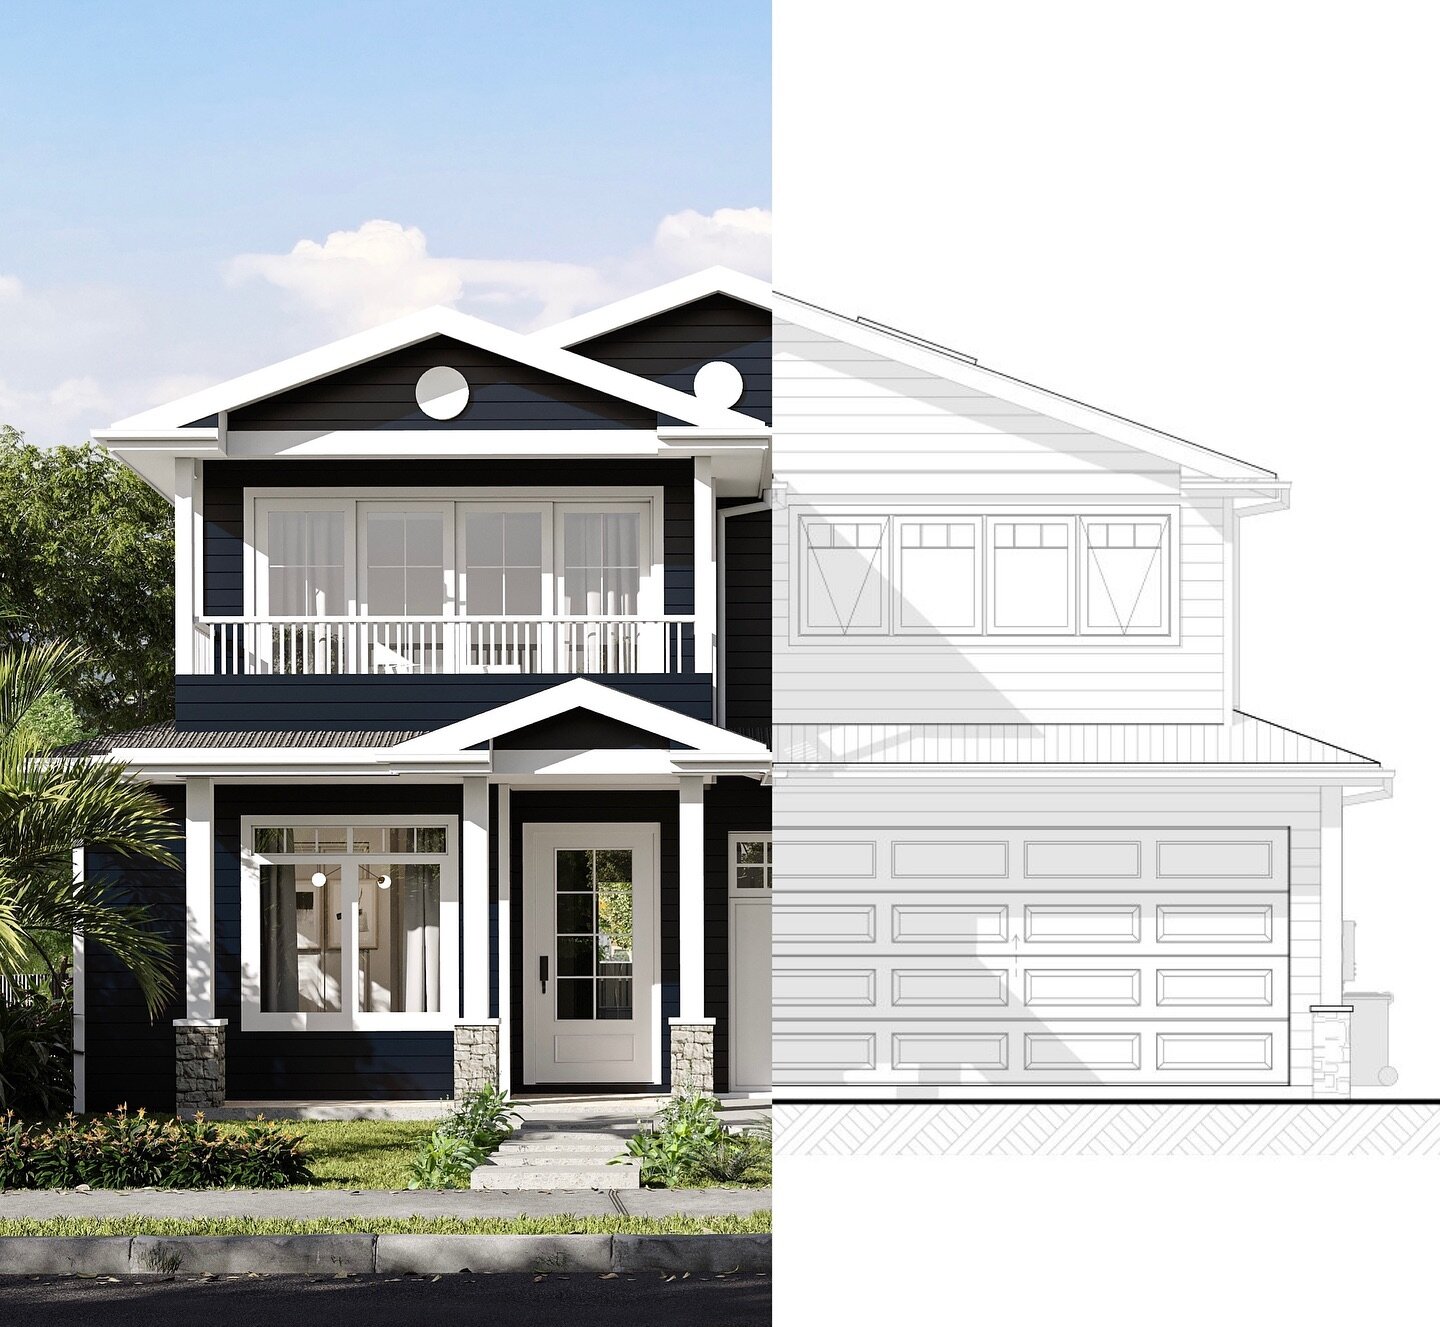 Front Elevation of our new 424m2 Custom Design Two Storey Home coming soon to Mona Vale..✏️ 🏡 🌳 ☀️ 

▪️5 Bedrooms &amp; 4 Bathrooms 
▪️Open Plan Family / Dining / Kitchen
▪️Media Room
▪️Rumpus Room
▪️Butler Pantry
▪️Seperate Study 
▪️Covered Alfres